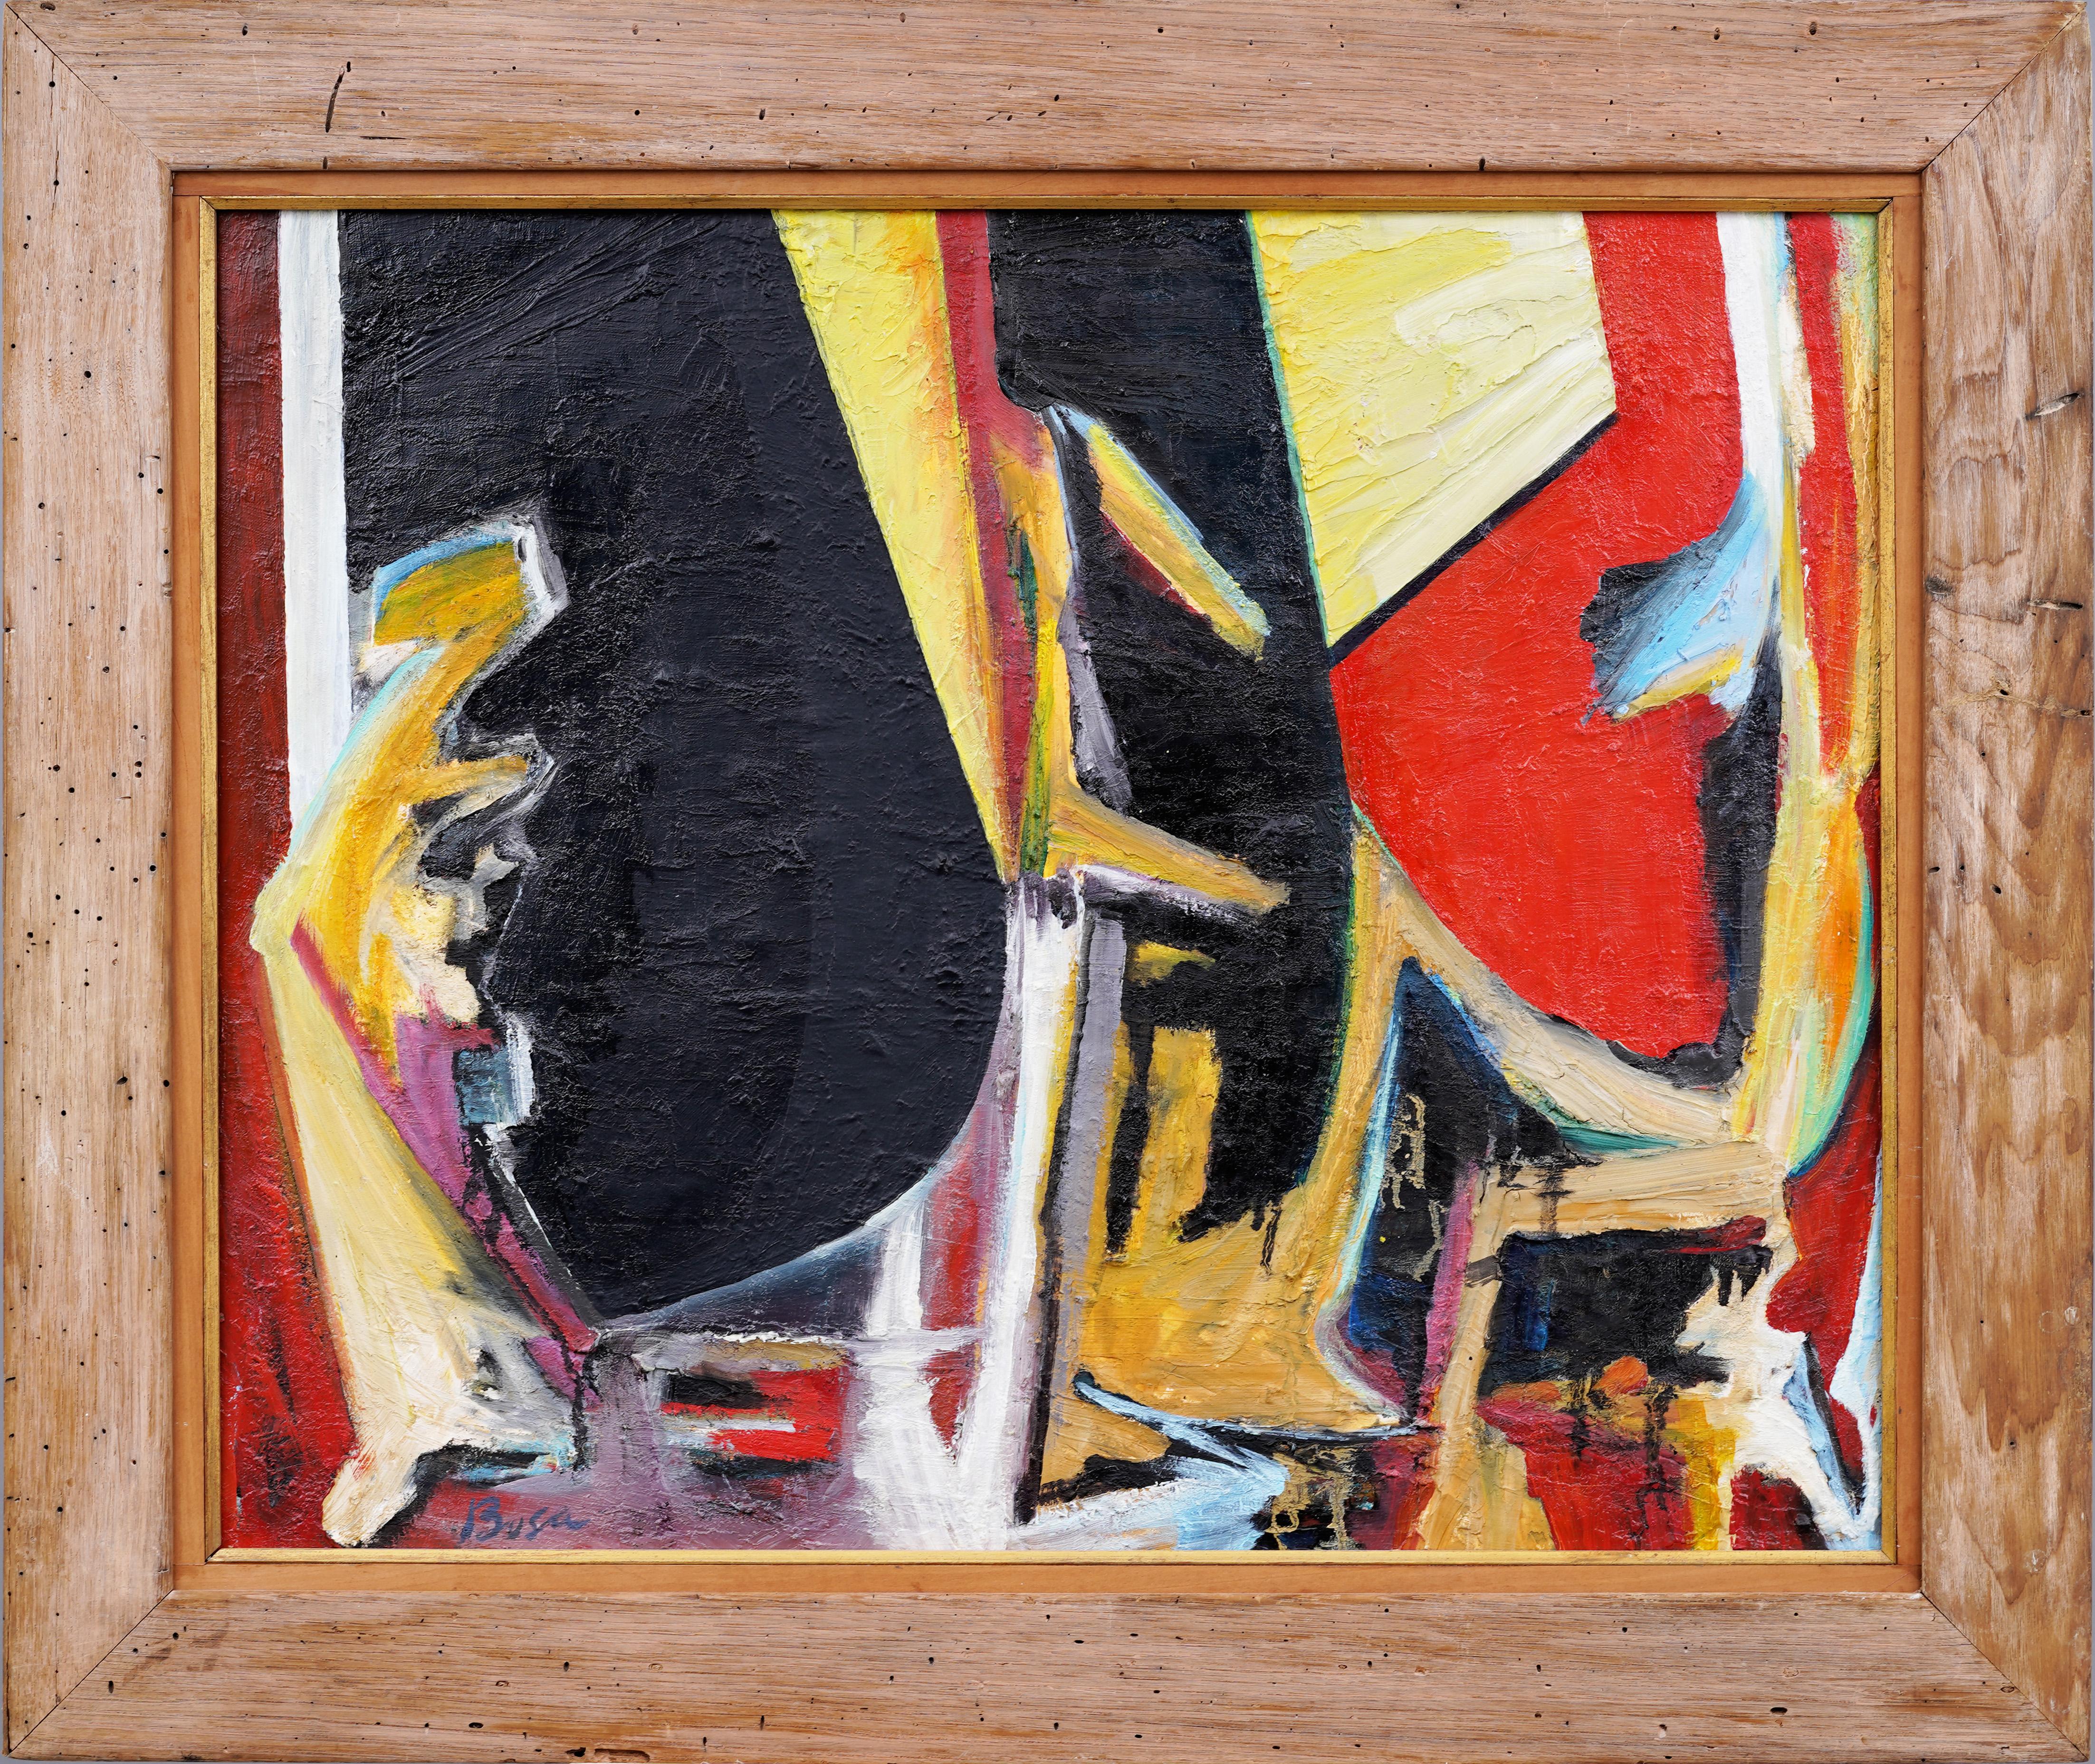 Very impressive early abstract painting by Peter Busa (1914 - 1985).  Oil on canvas.  Signed lower left.  Housed in a period modernist frame.  